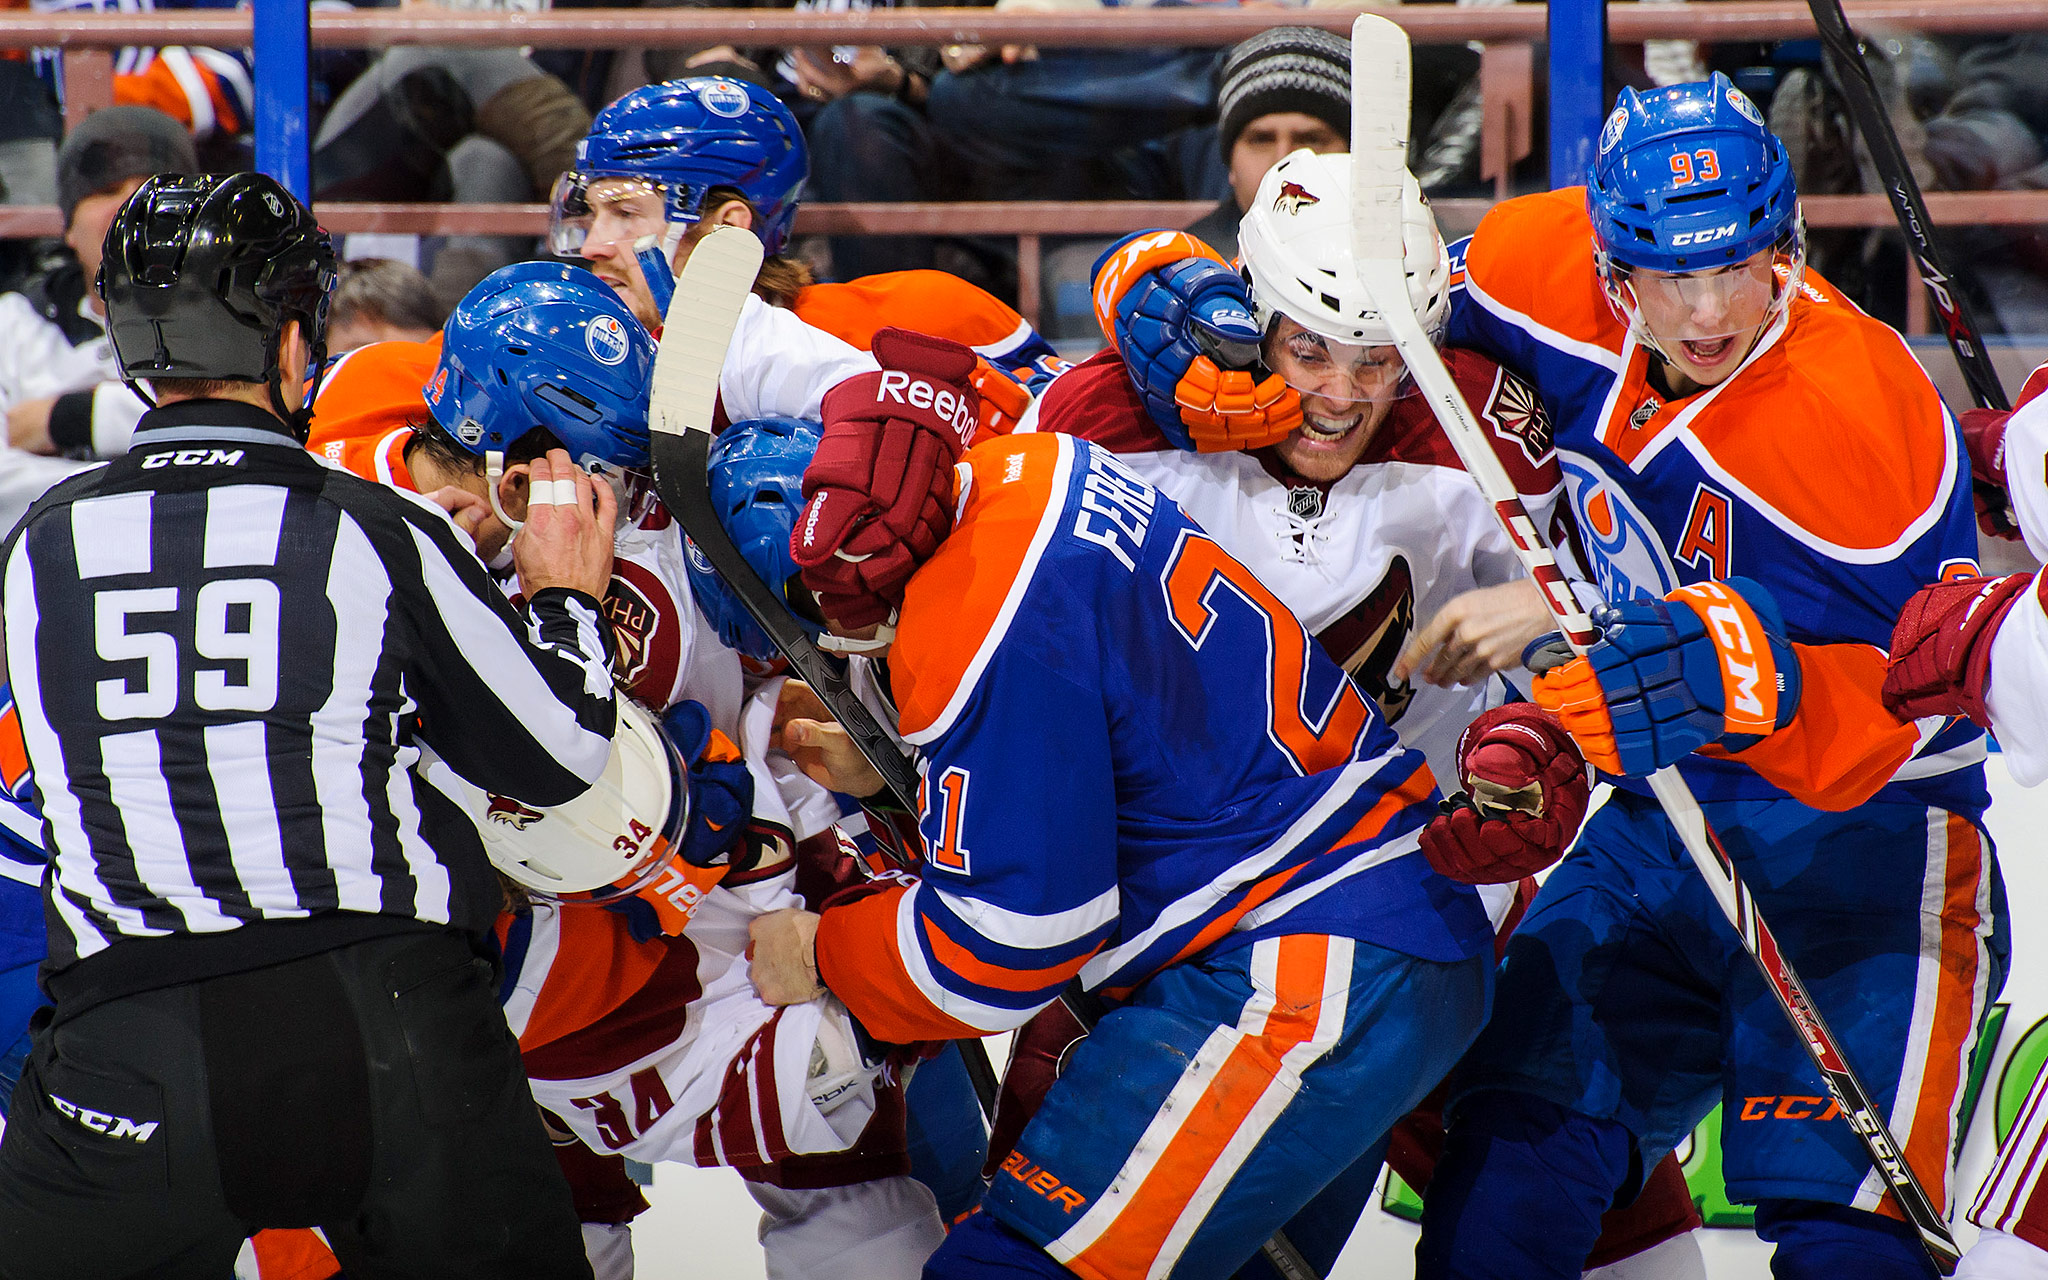 Coyotes-Oilers - The Week in Pictures for Dec. 2-8, 2013 - ESPN